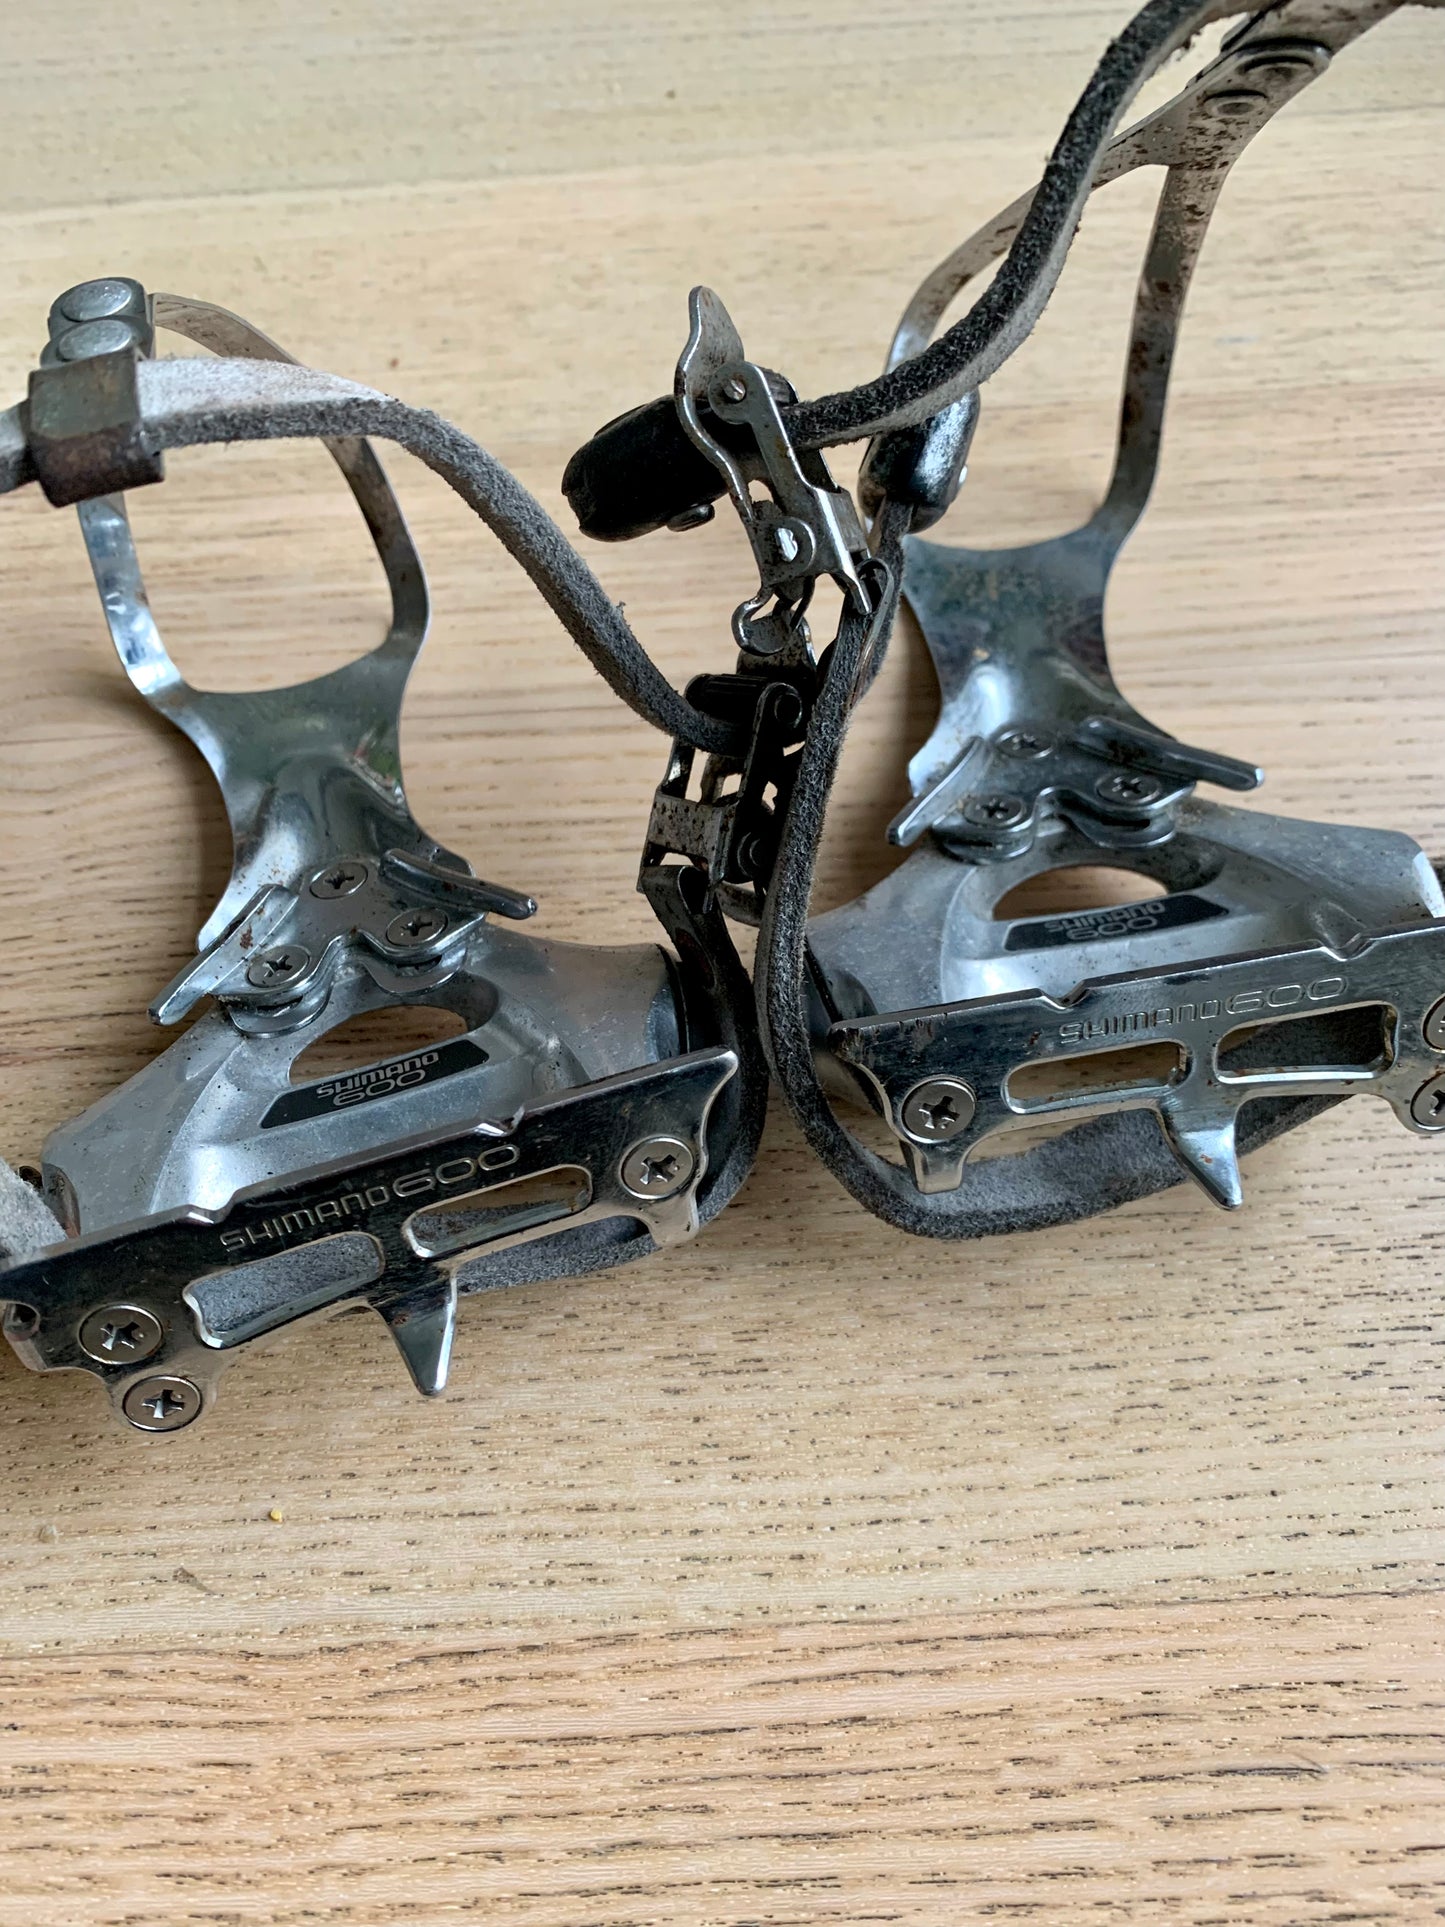 Shimano 600 PD6207 pedals with cages